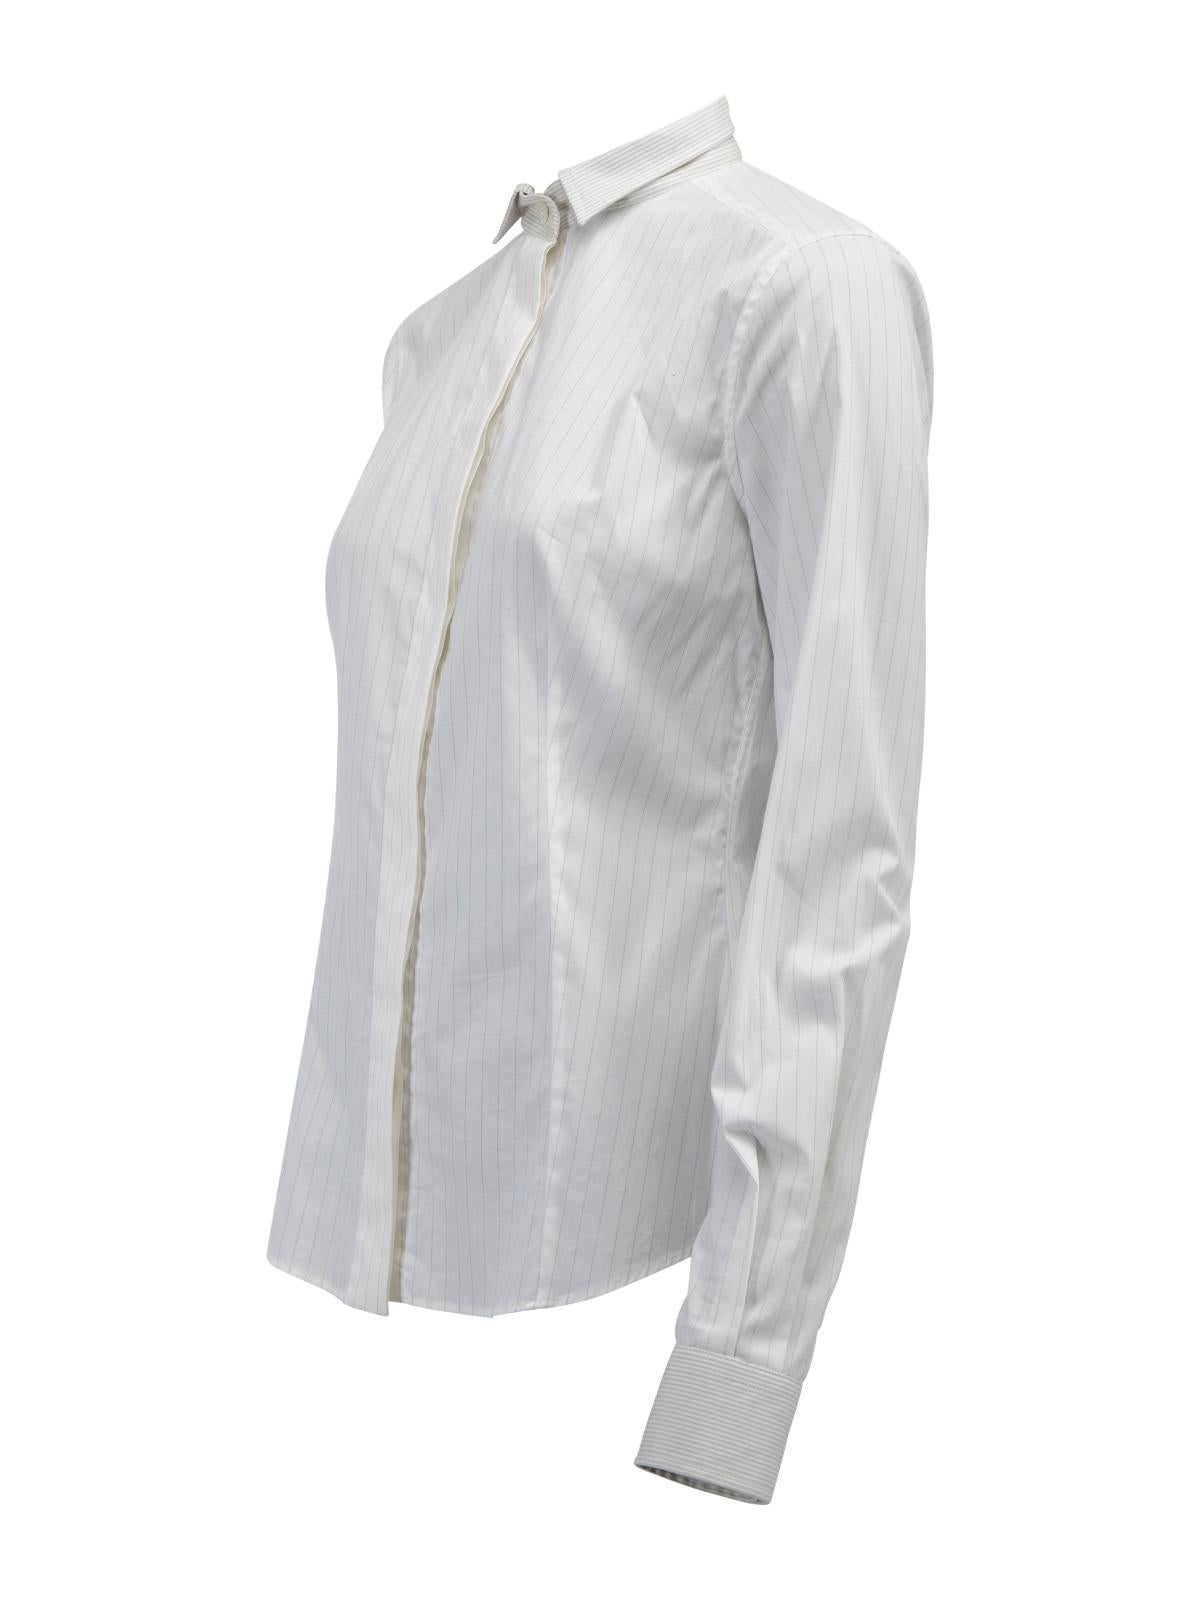 Pre-Loved Dolce & Gabbana Women's White Striped Cotton Shirt with Detachable For Sale 1